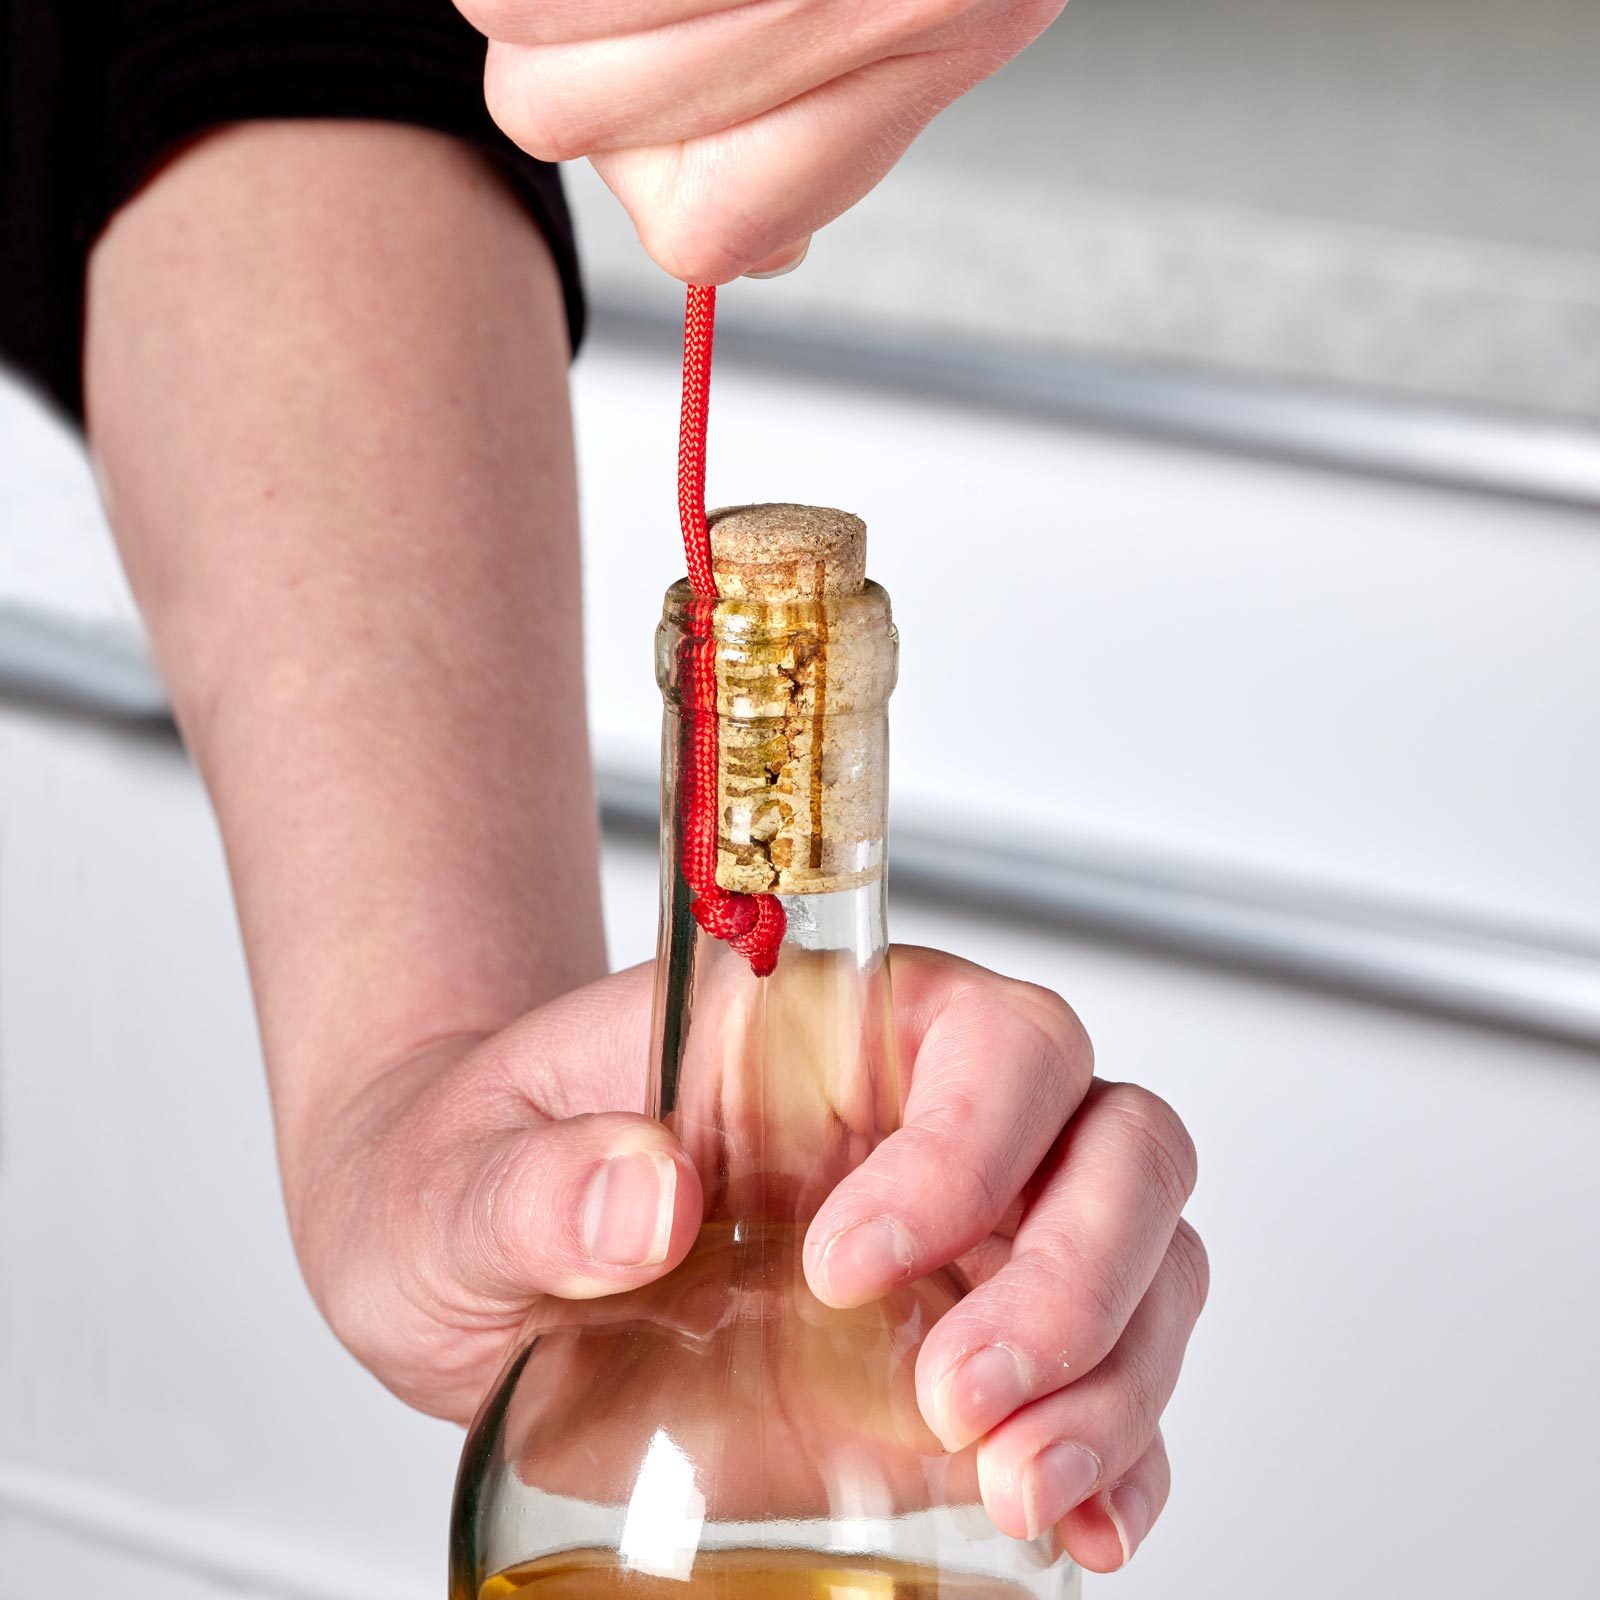 removing a cork from a wine bottle with a piece of string